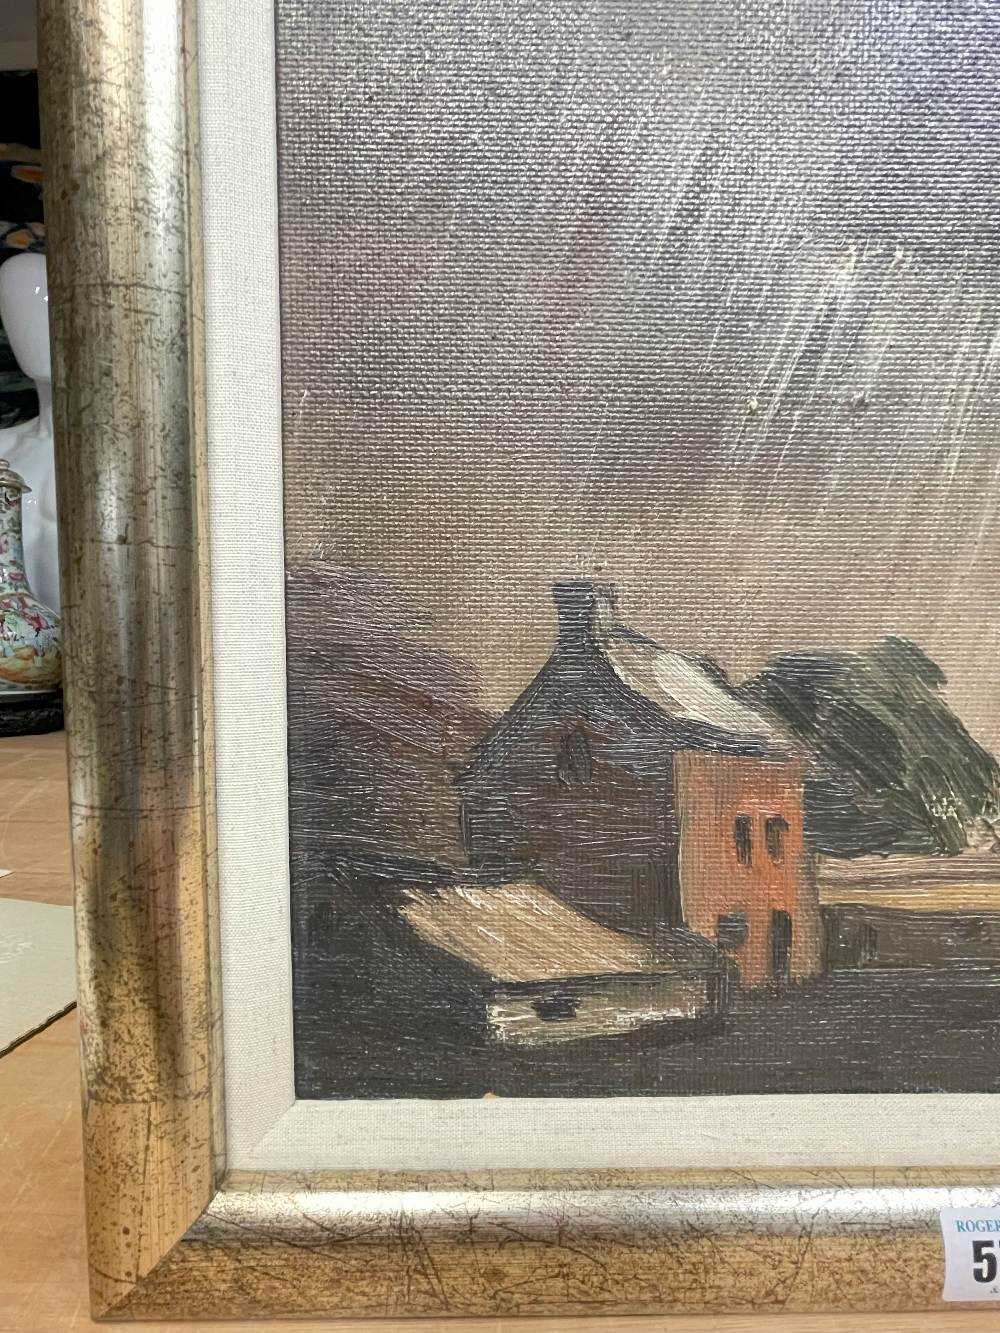 ‡ THEODORE MAJOR (1908-1999), oil on board - Storm at Farm, landscape with farm buildings and - Image 8 of 25